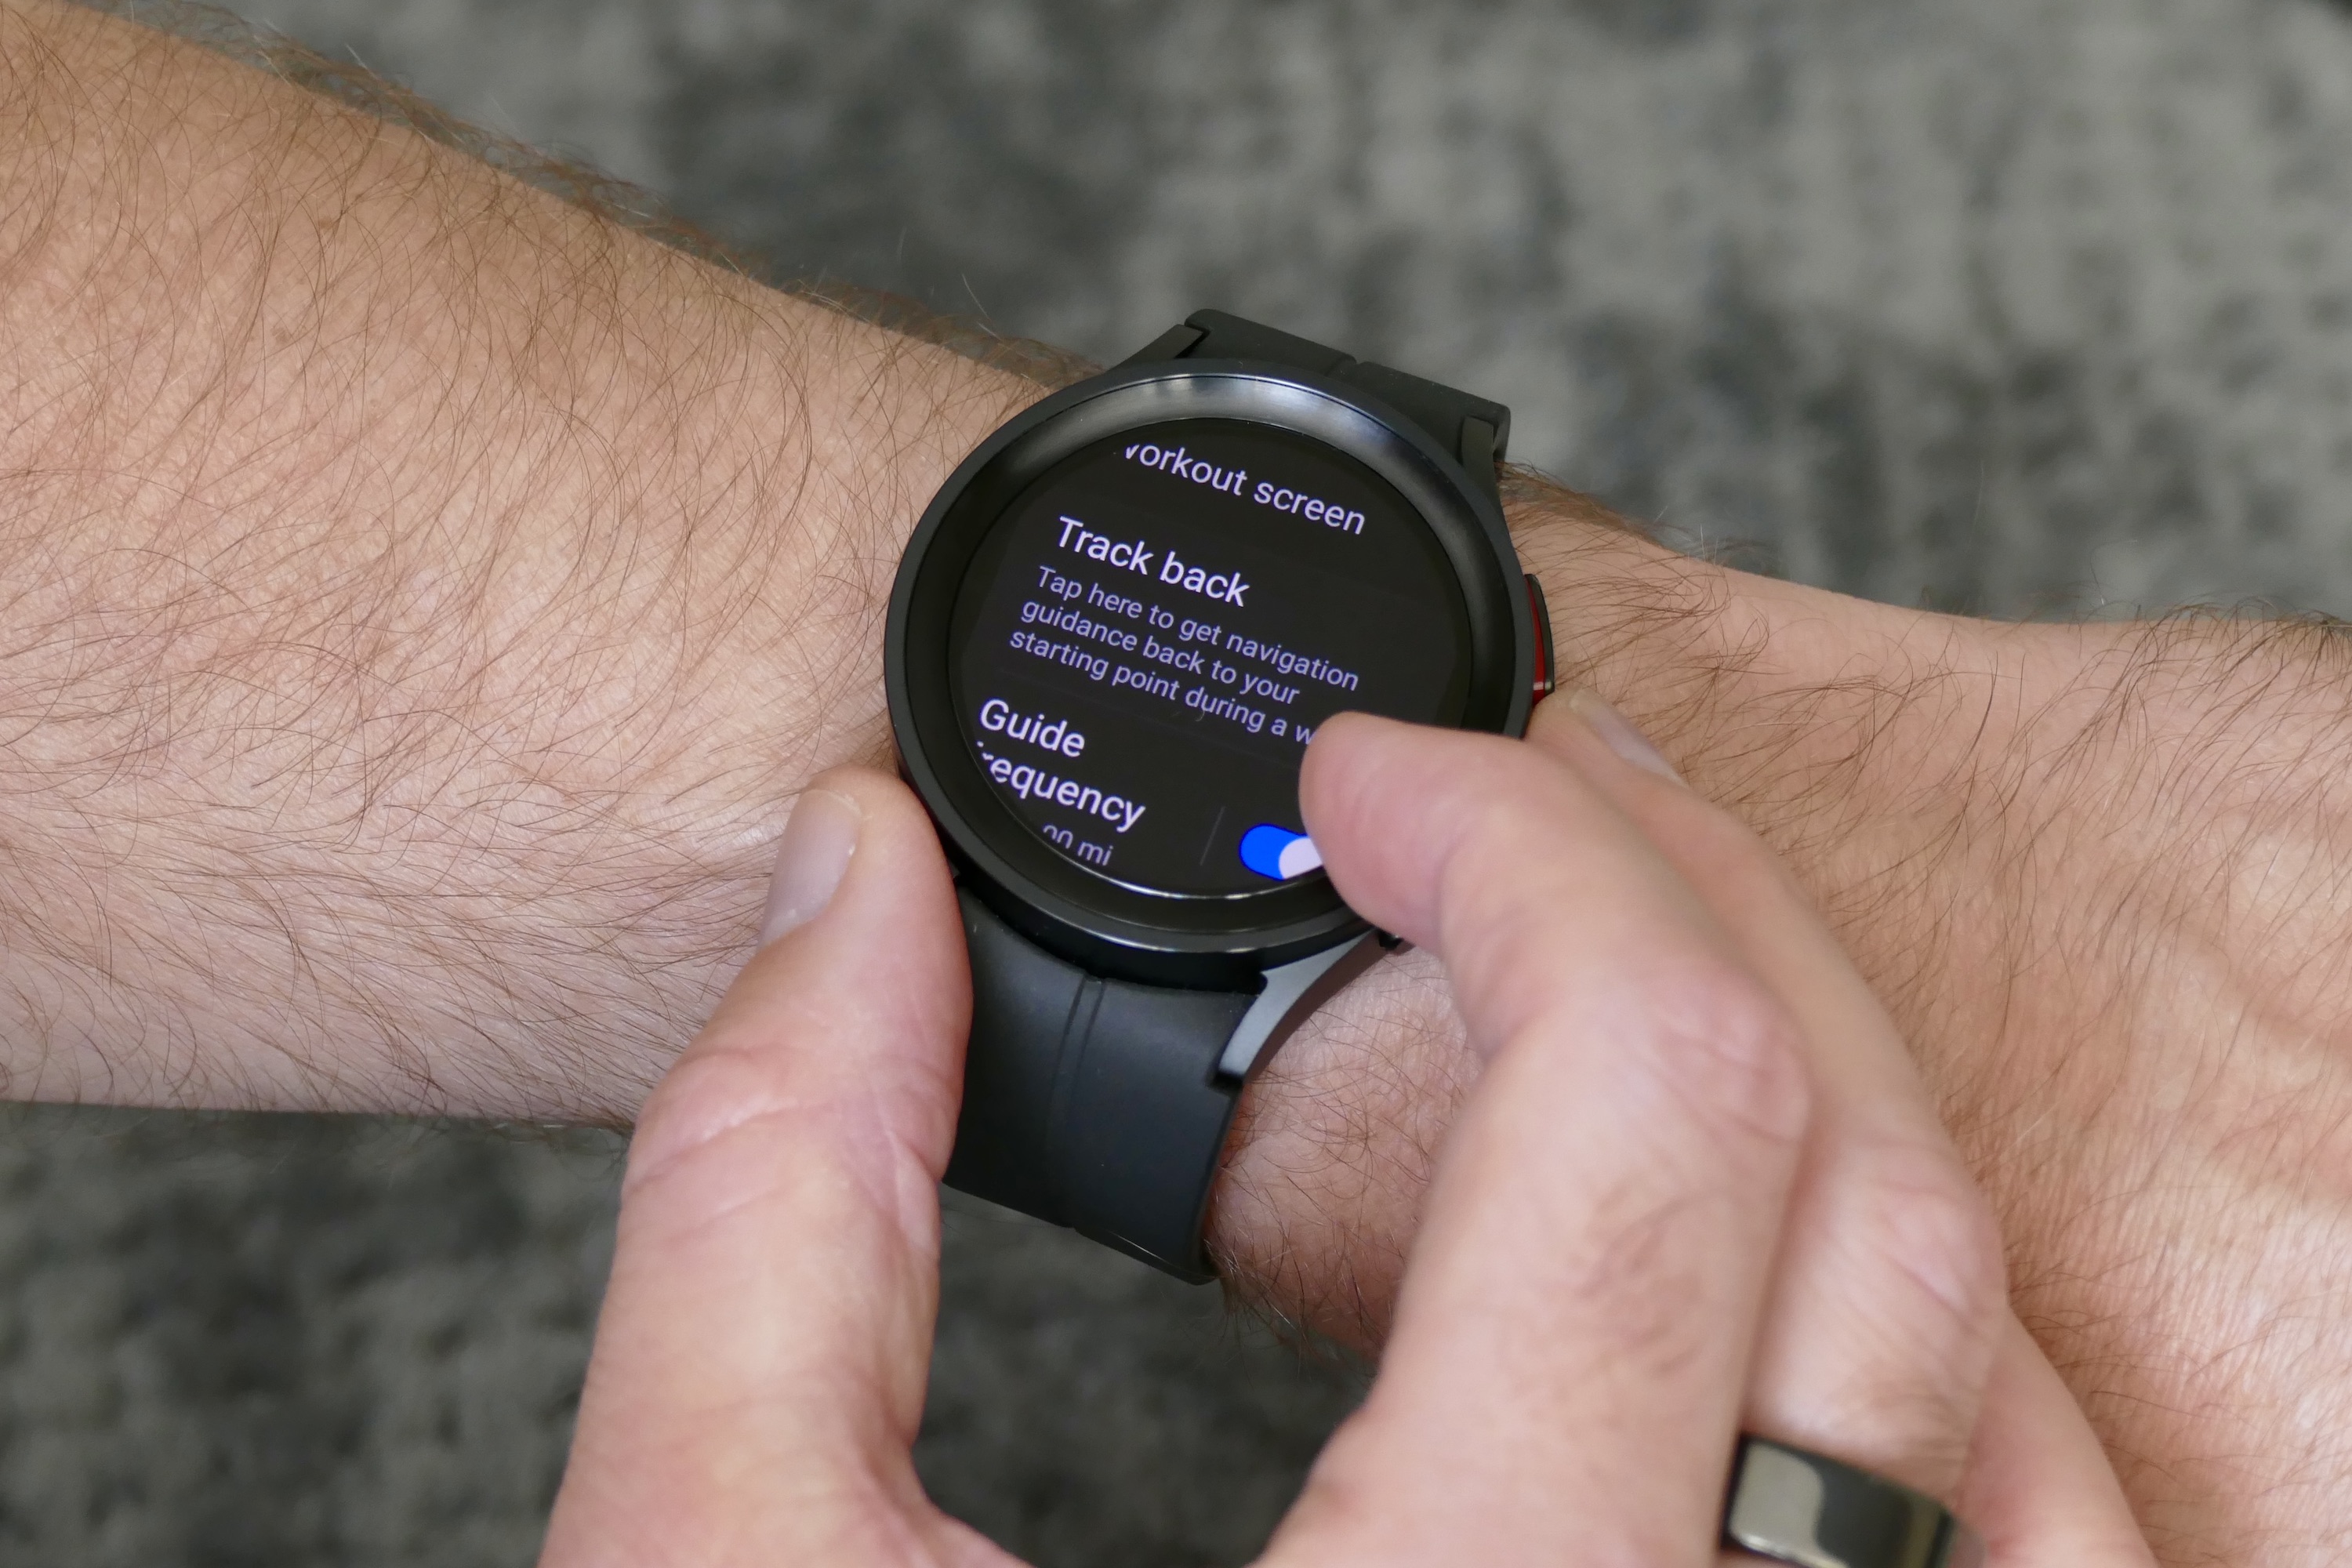 Activating the Track back feature on the Galaxy Watch 5 Pro.